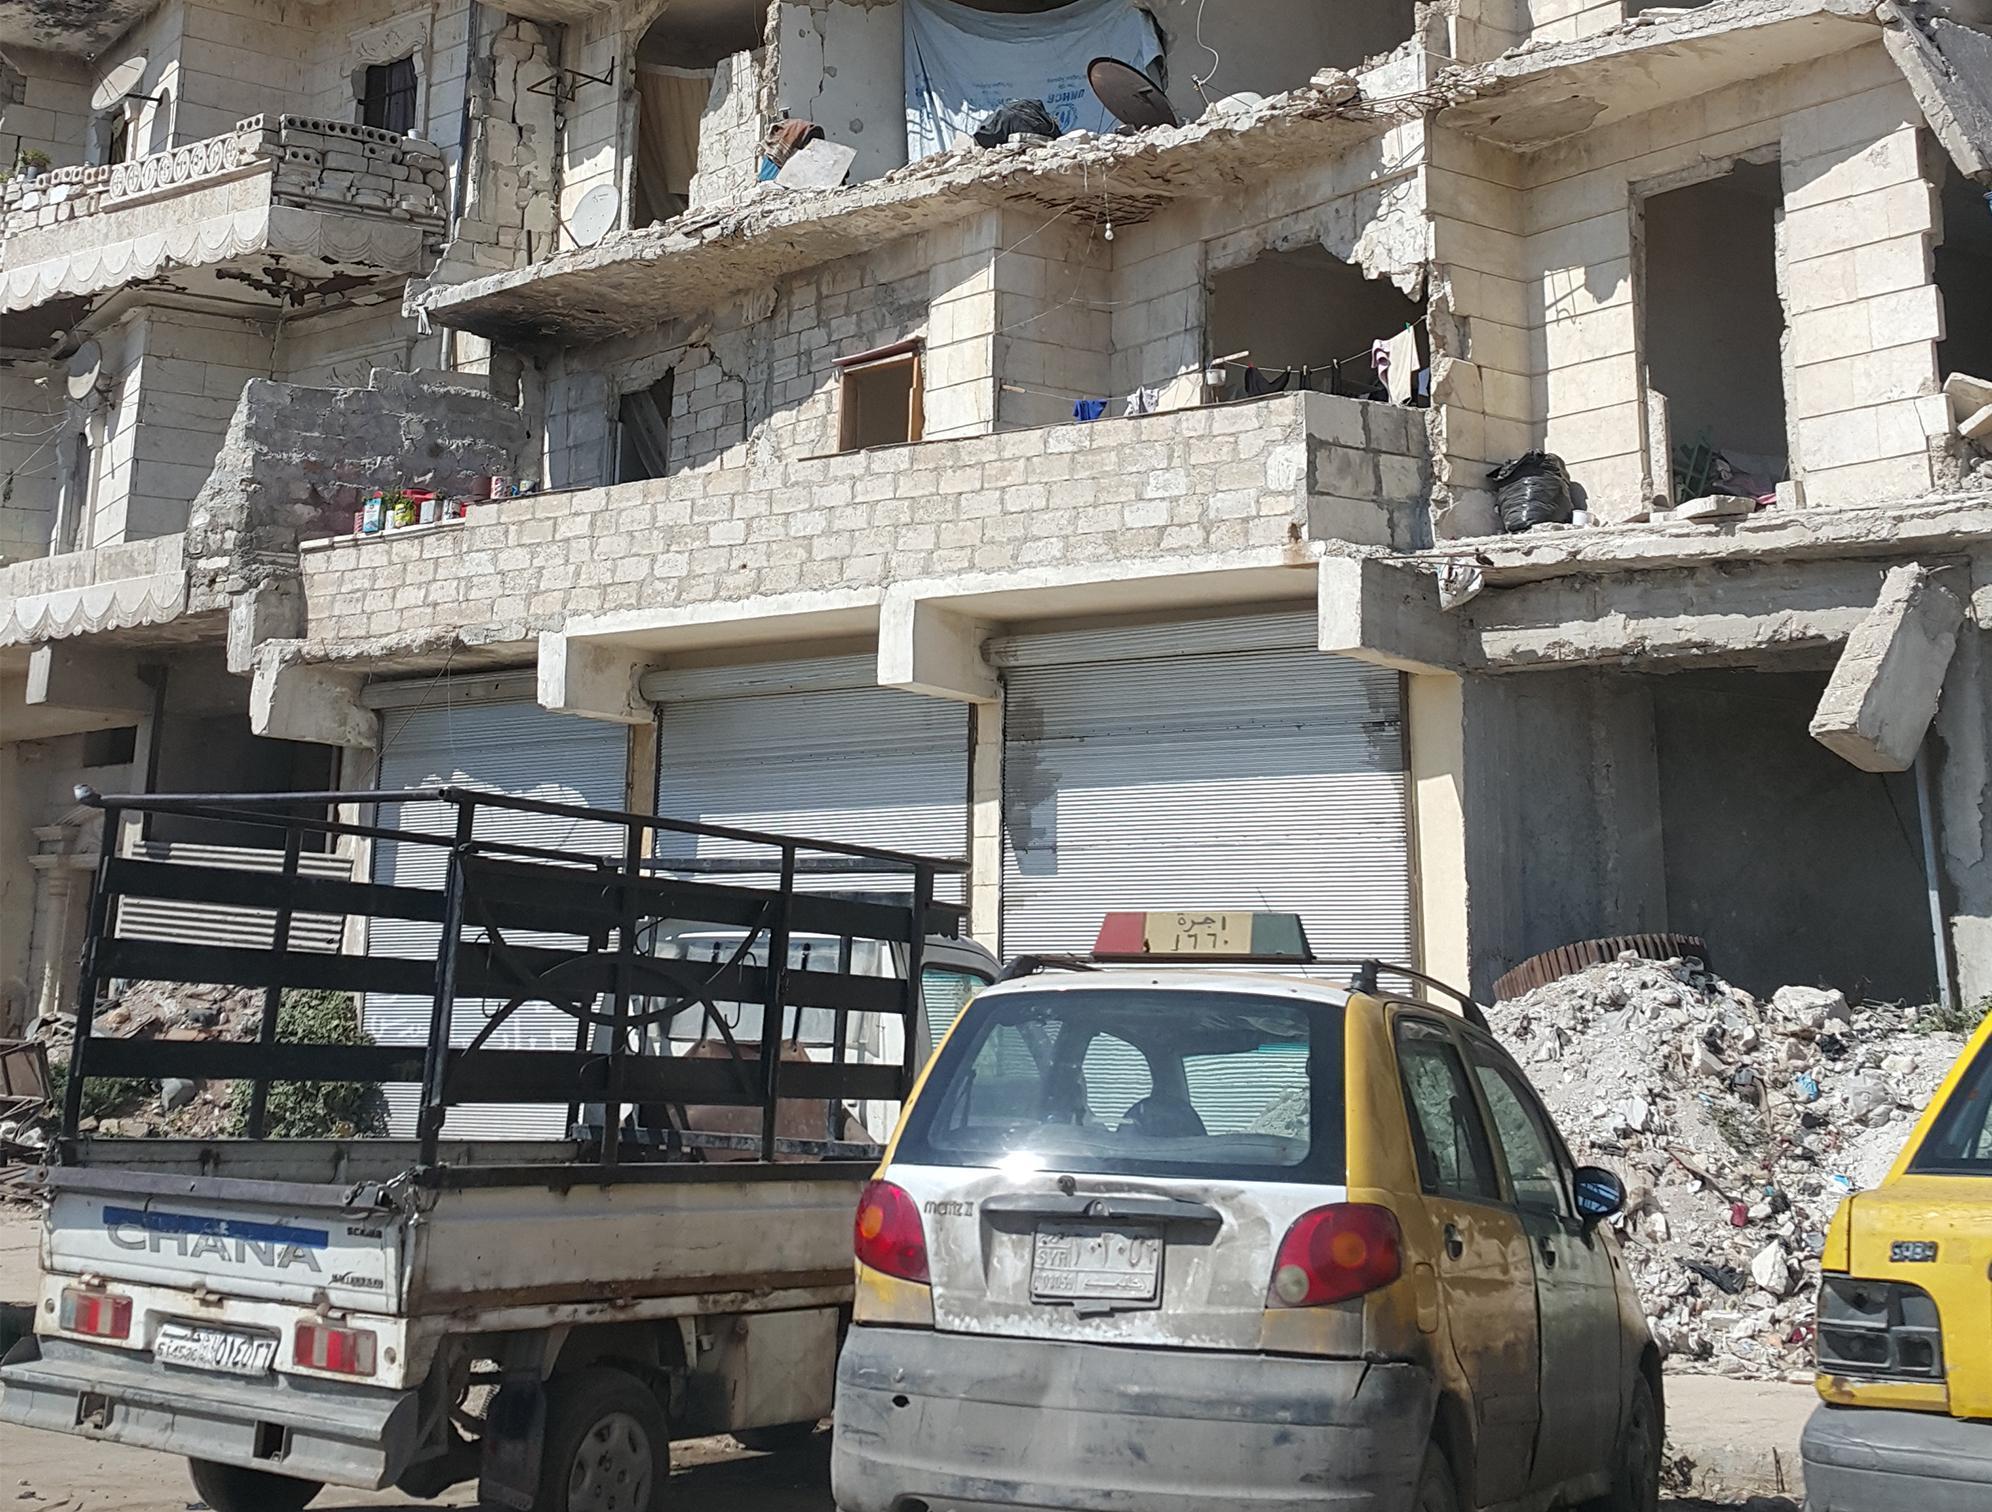 In Aleppo, parking beside the rubble of the city is as normal as the daily rumble of shells